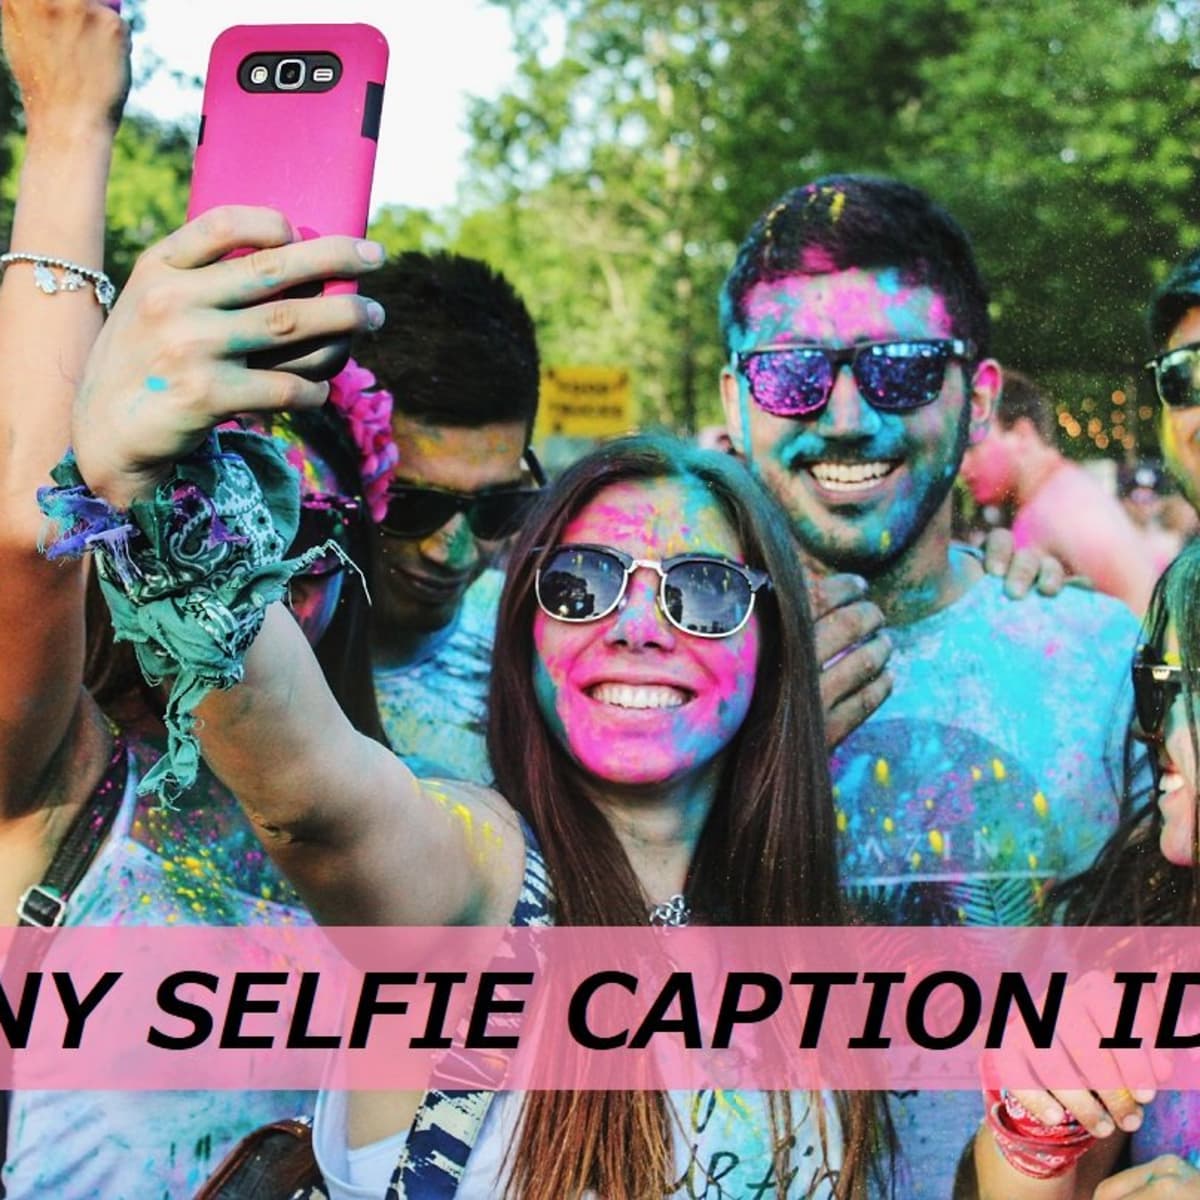 100+ Funny Selfie Quotes and Caption Ideas - TurboFuture